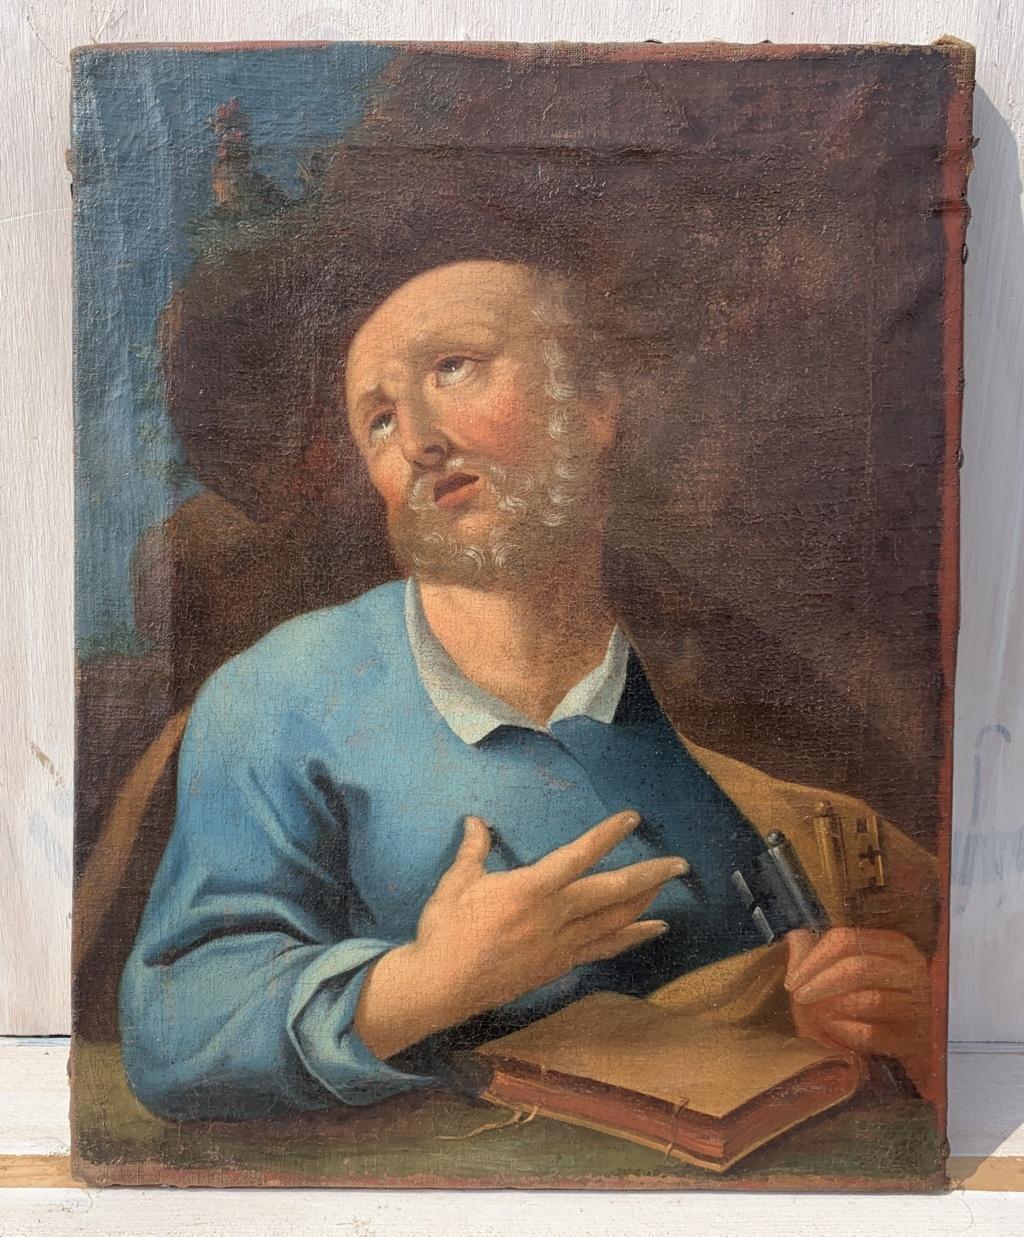 Baroque painter (Italian school) - 18th century figure painting - Saint Peter - Painting by Unknown